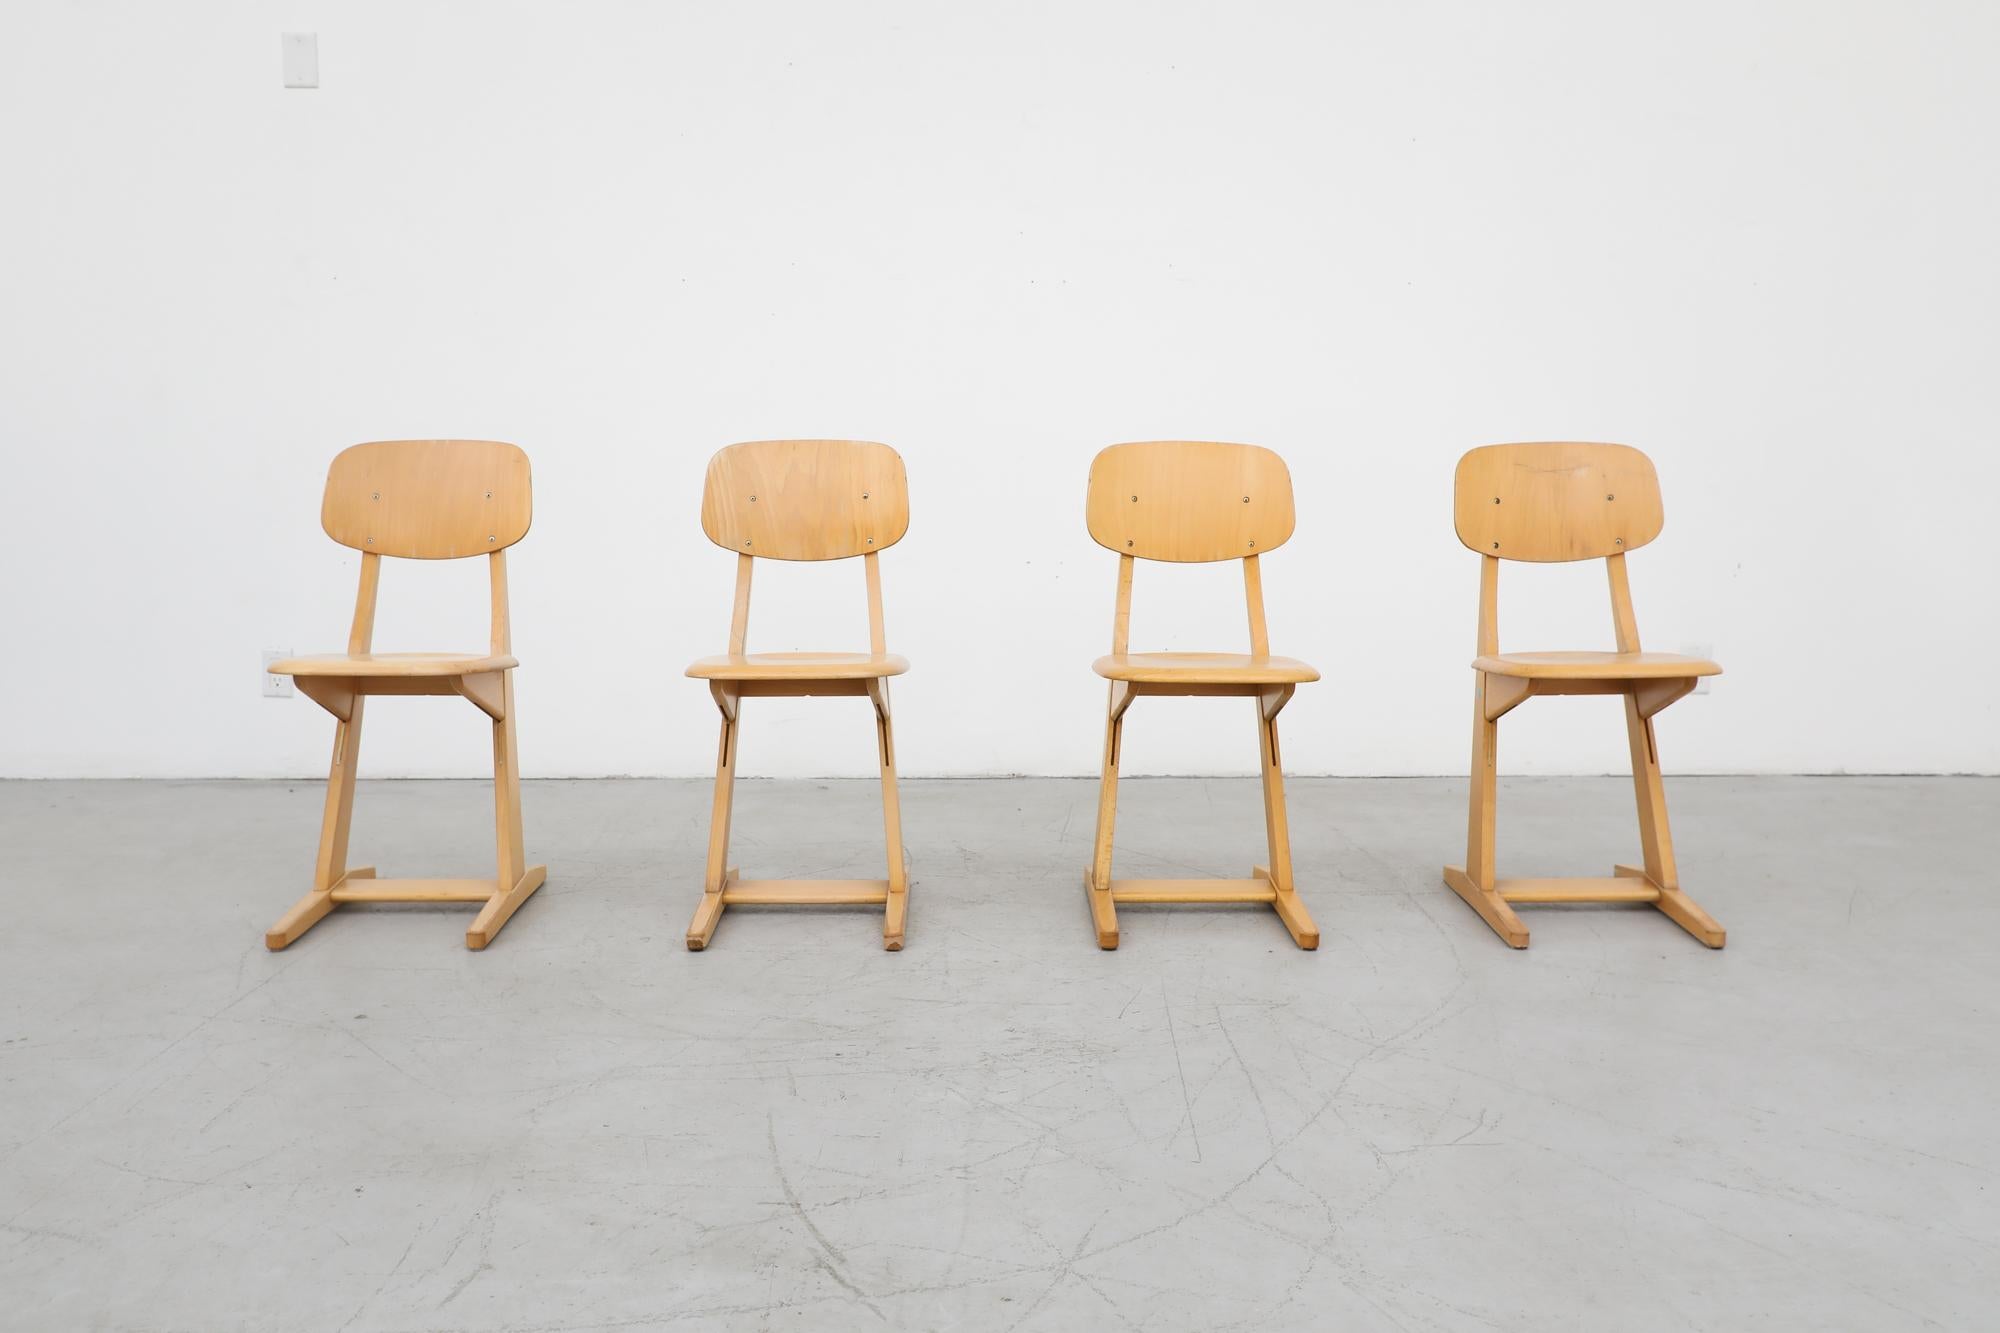 Set of 4 solid oak Casala chairs with cantilevered seats. In original condition with visible wear consistent with their age and use. Set Price.